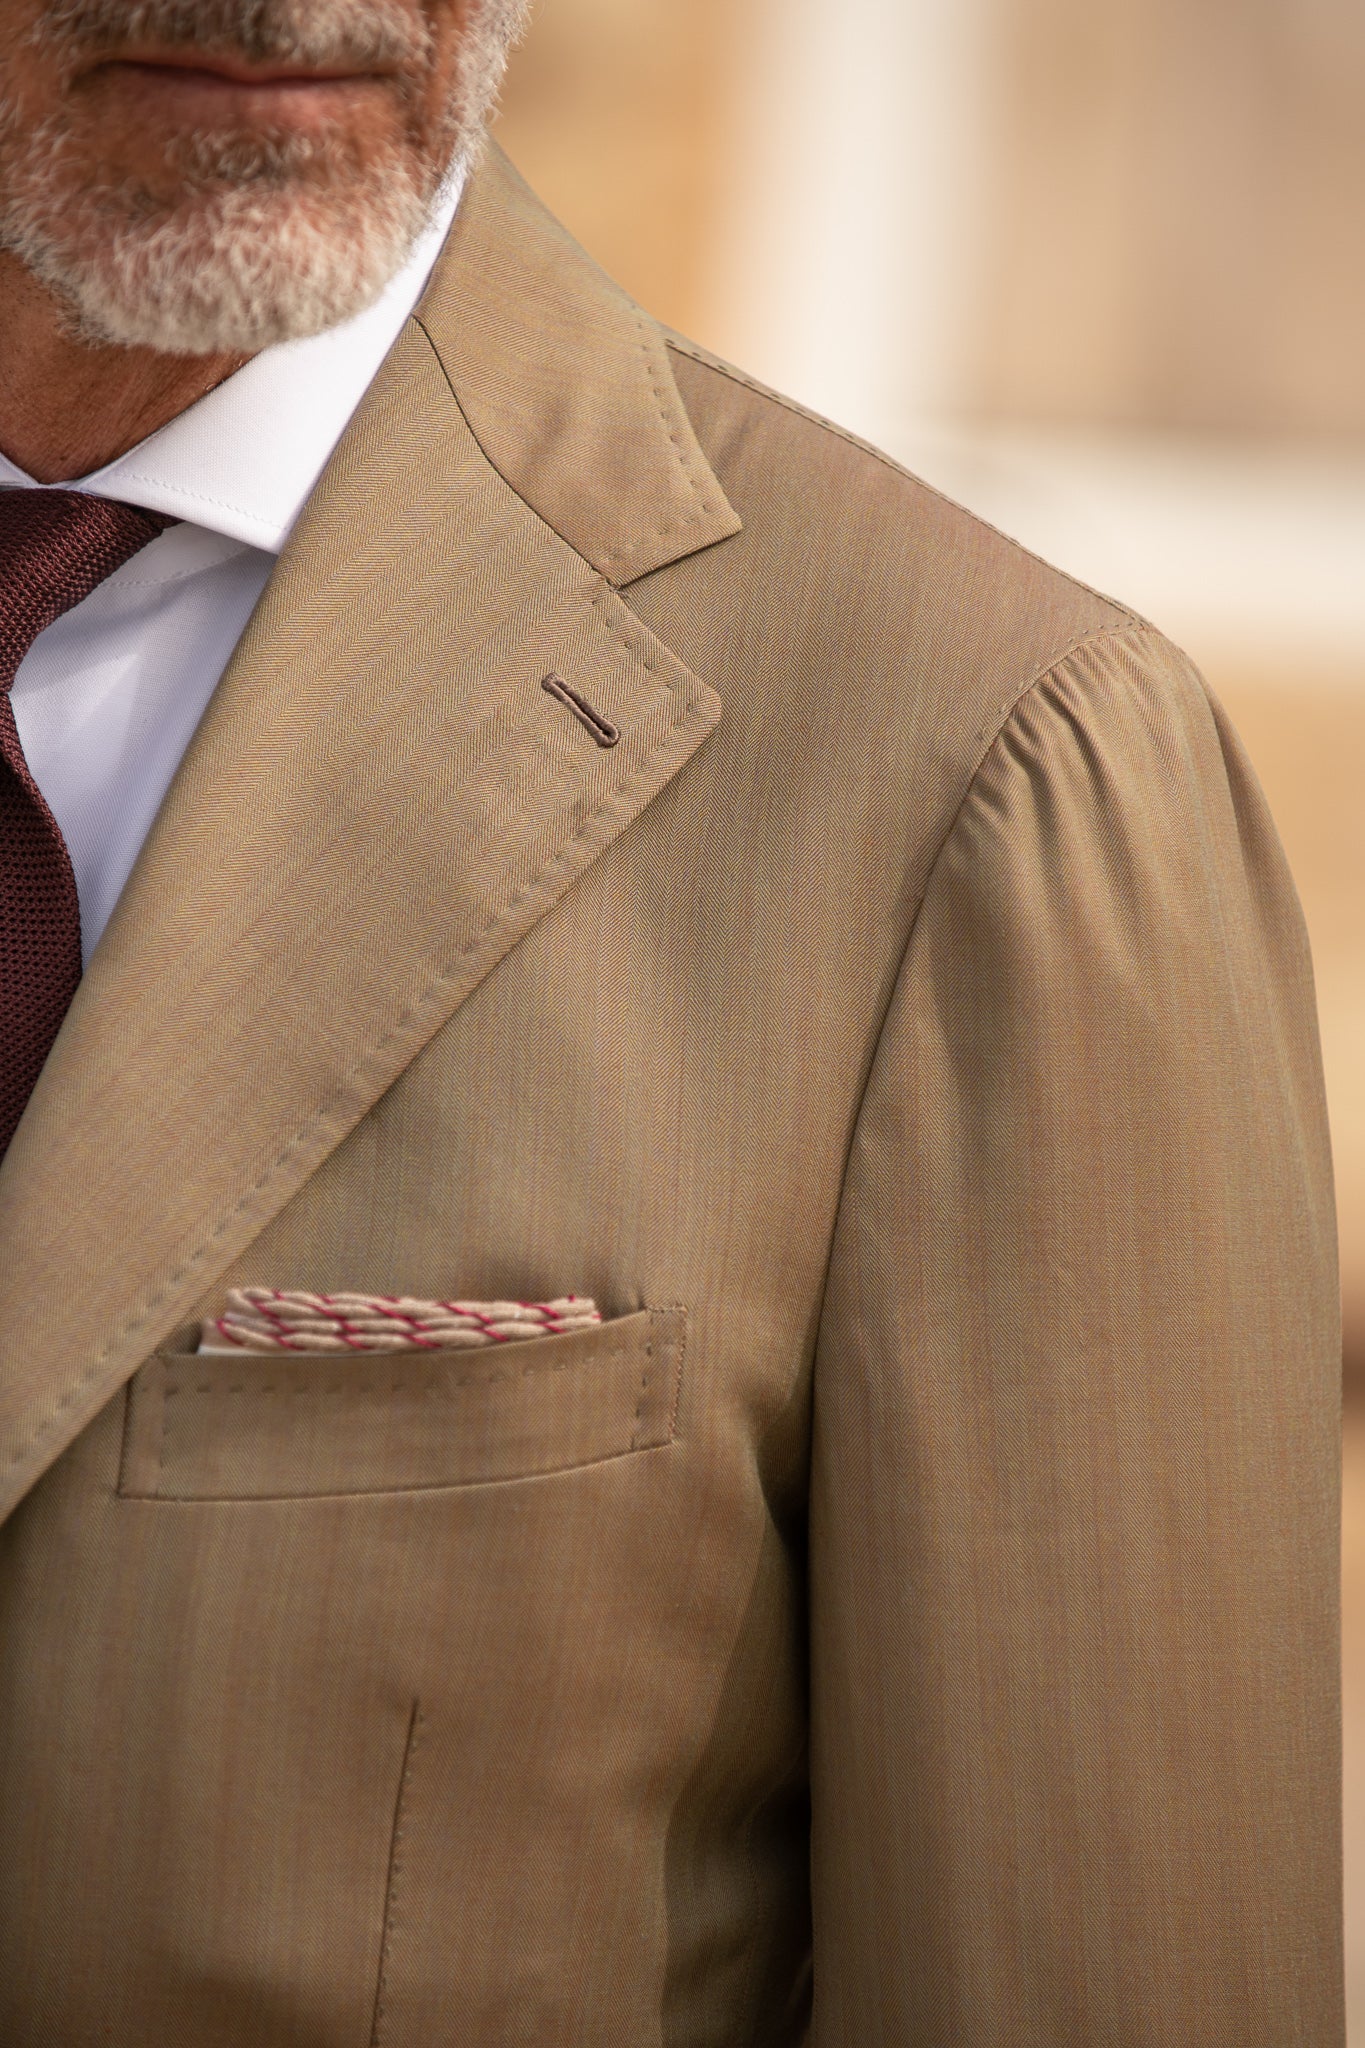 Solaro suit  - Made in Italy